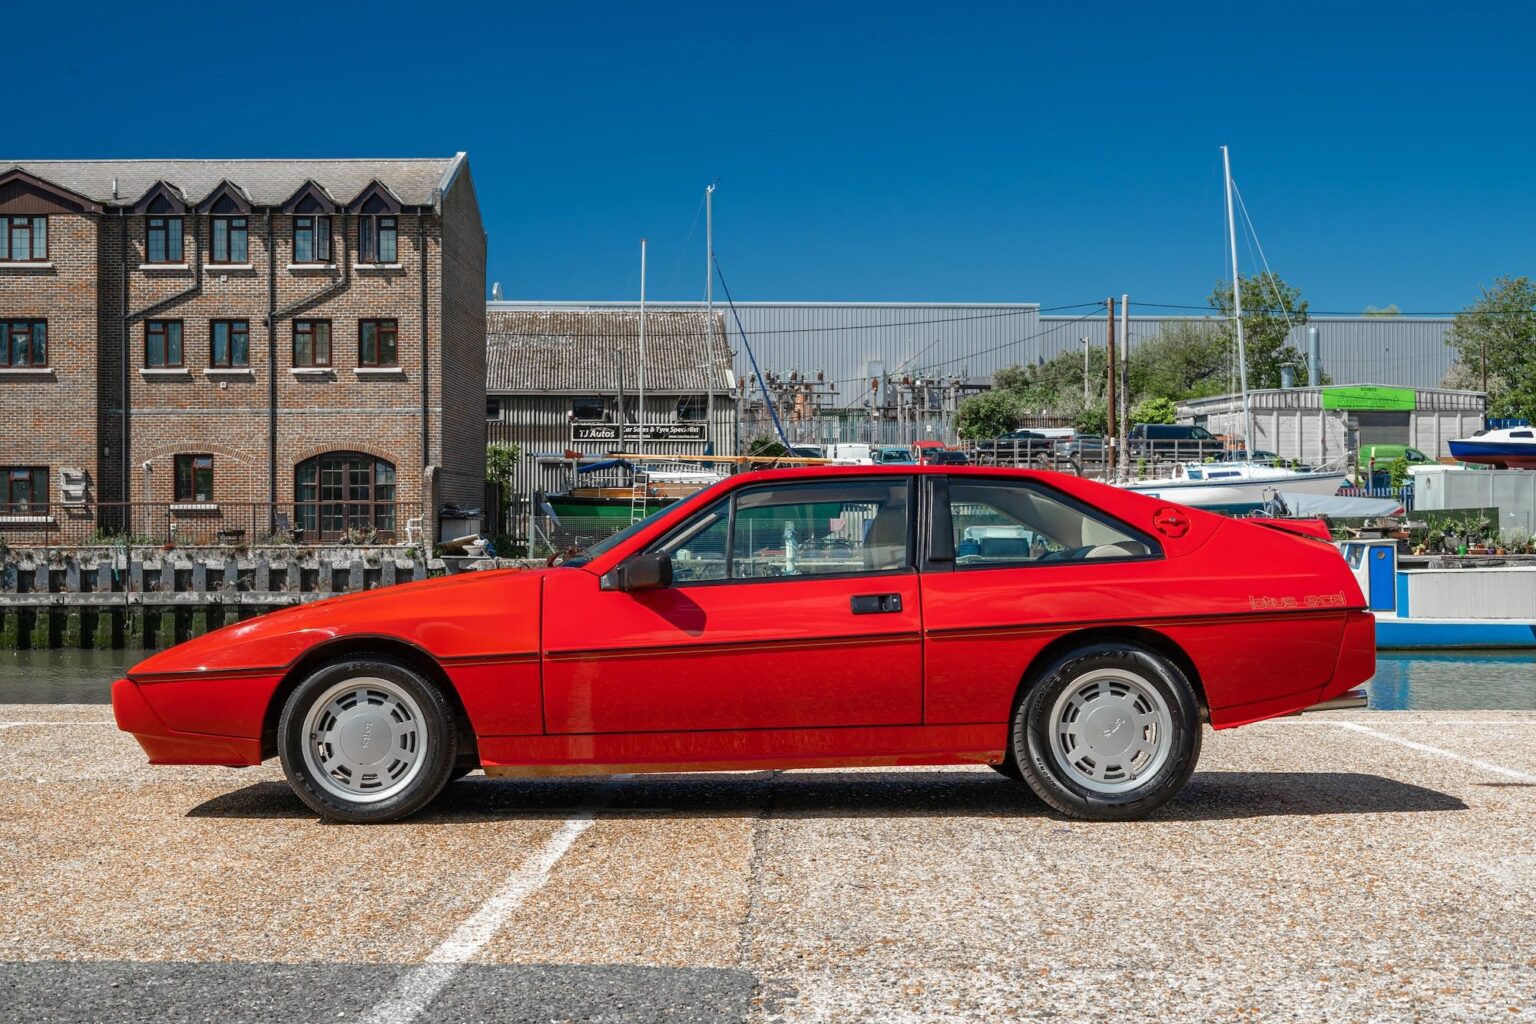 a red Lotus Excel from 1984. These are an obscure vintage European sports car